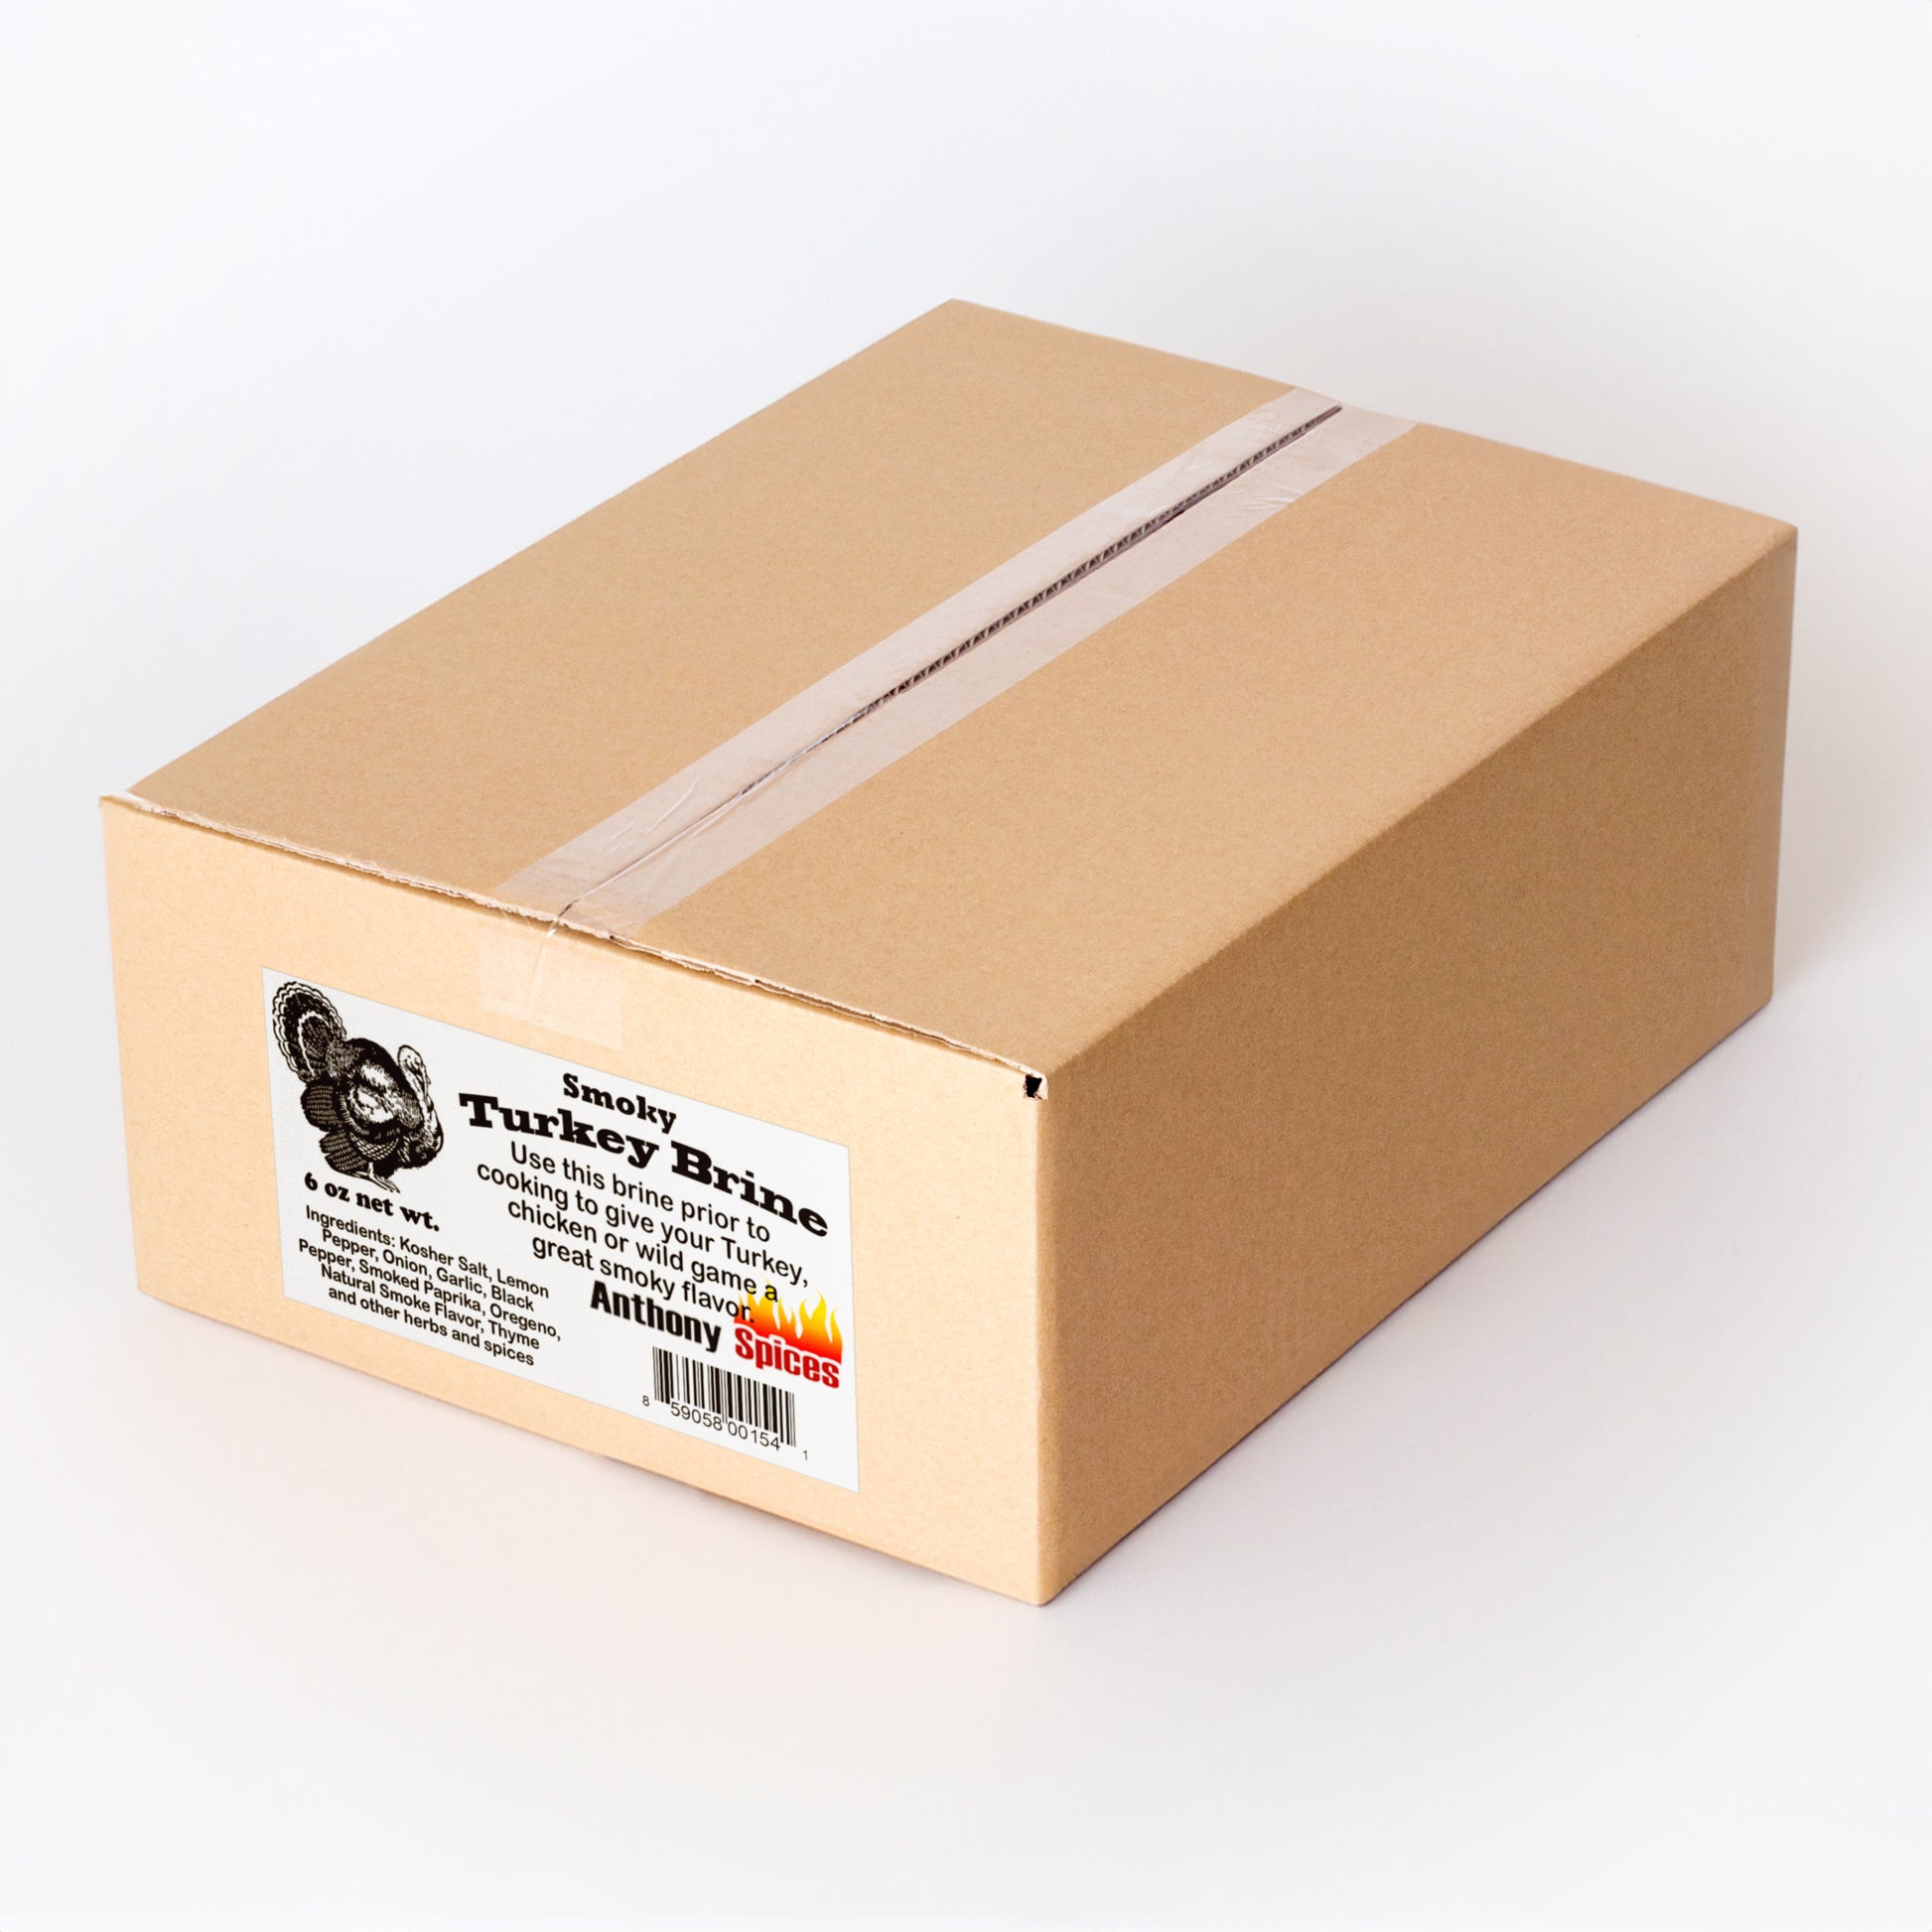 Case of 12 (16oz Bags) of Signature Turkey Brine - Closed shipping box with label